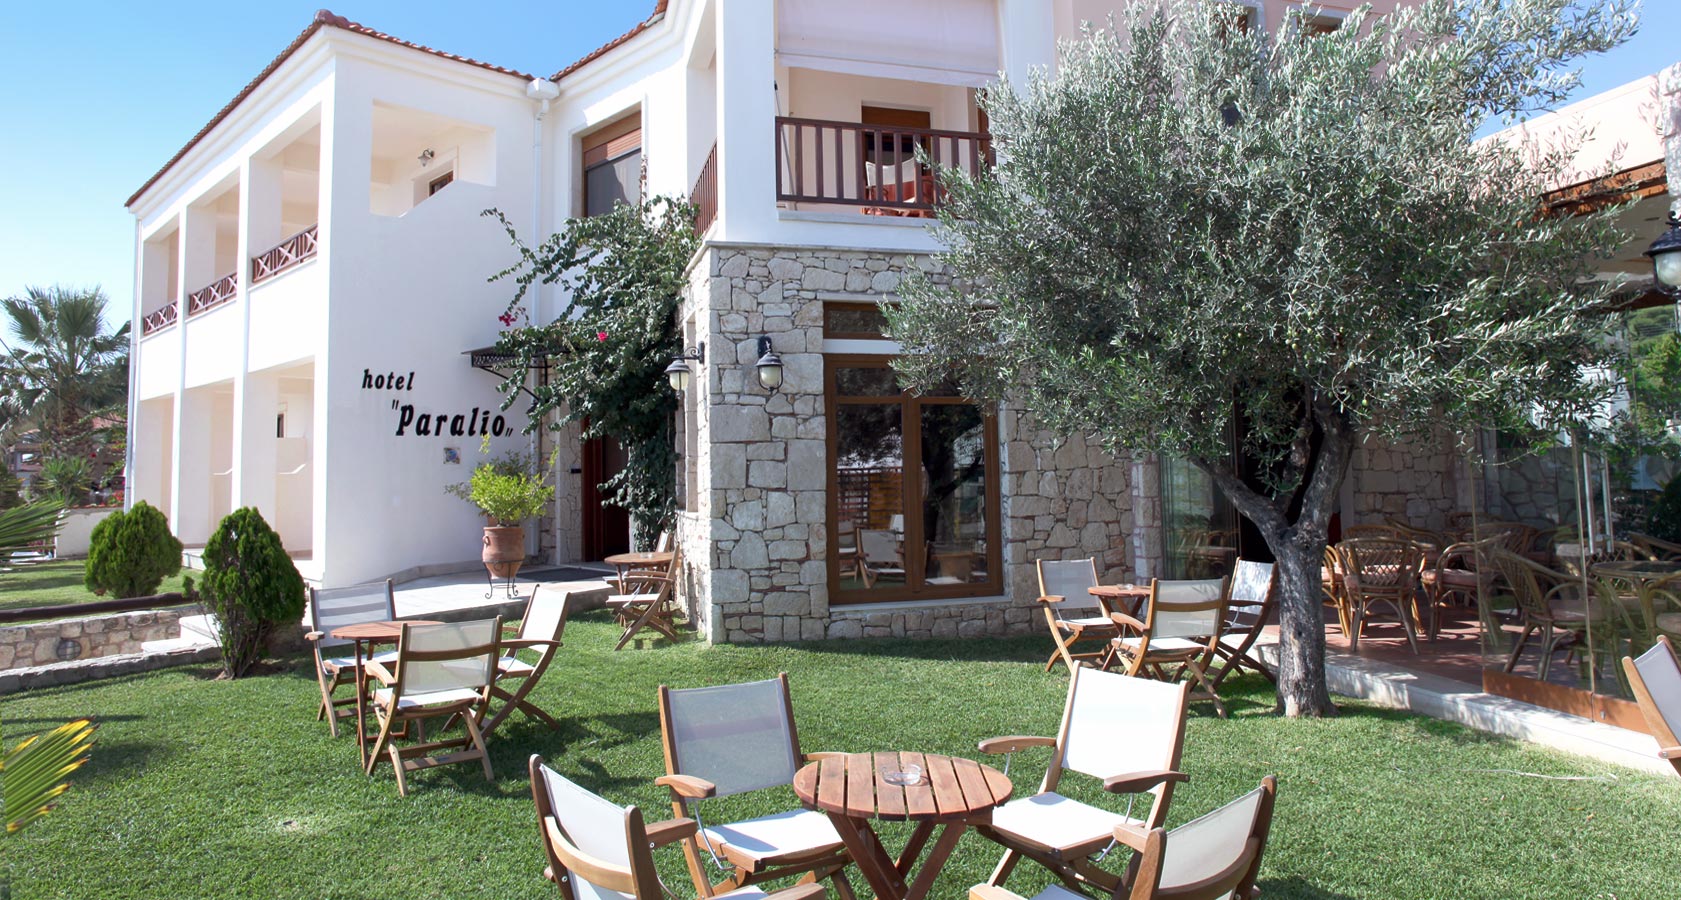 General Overview of Paralio Hotel in Possidi Halkidiki Greece